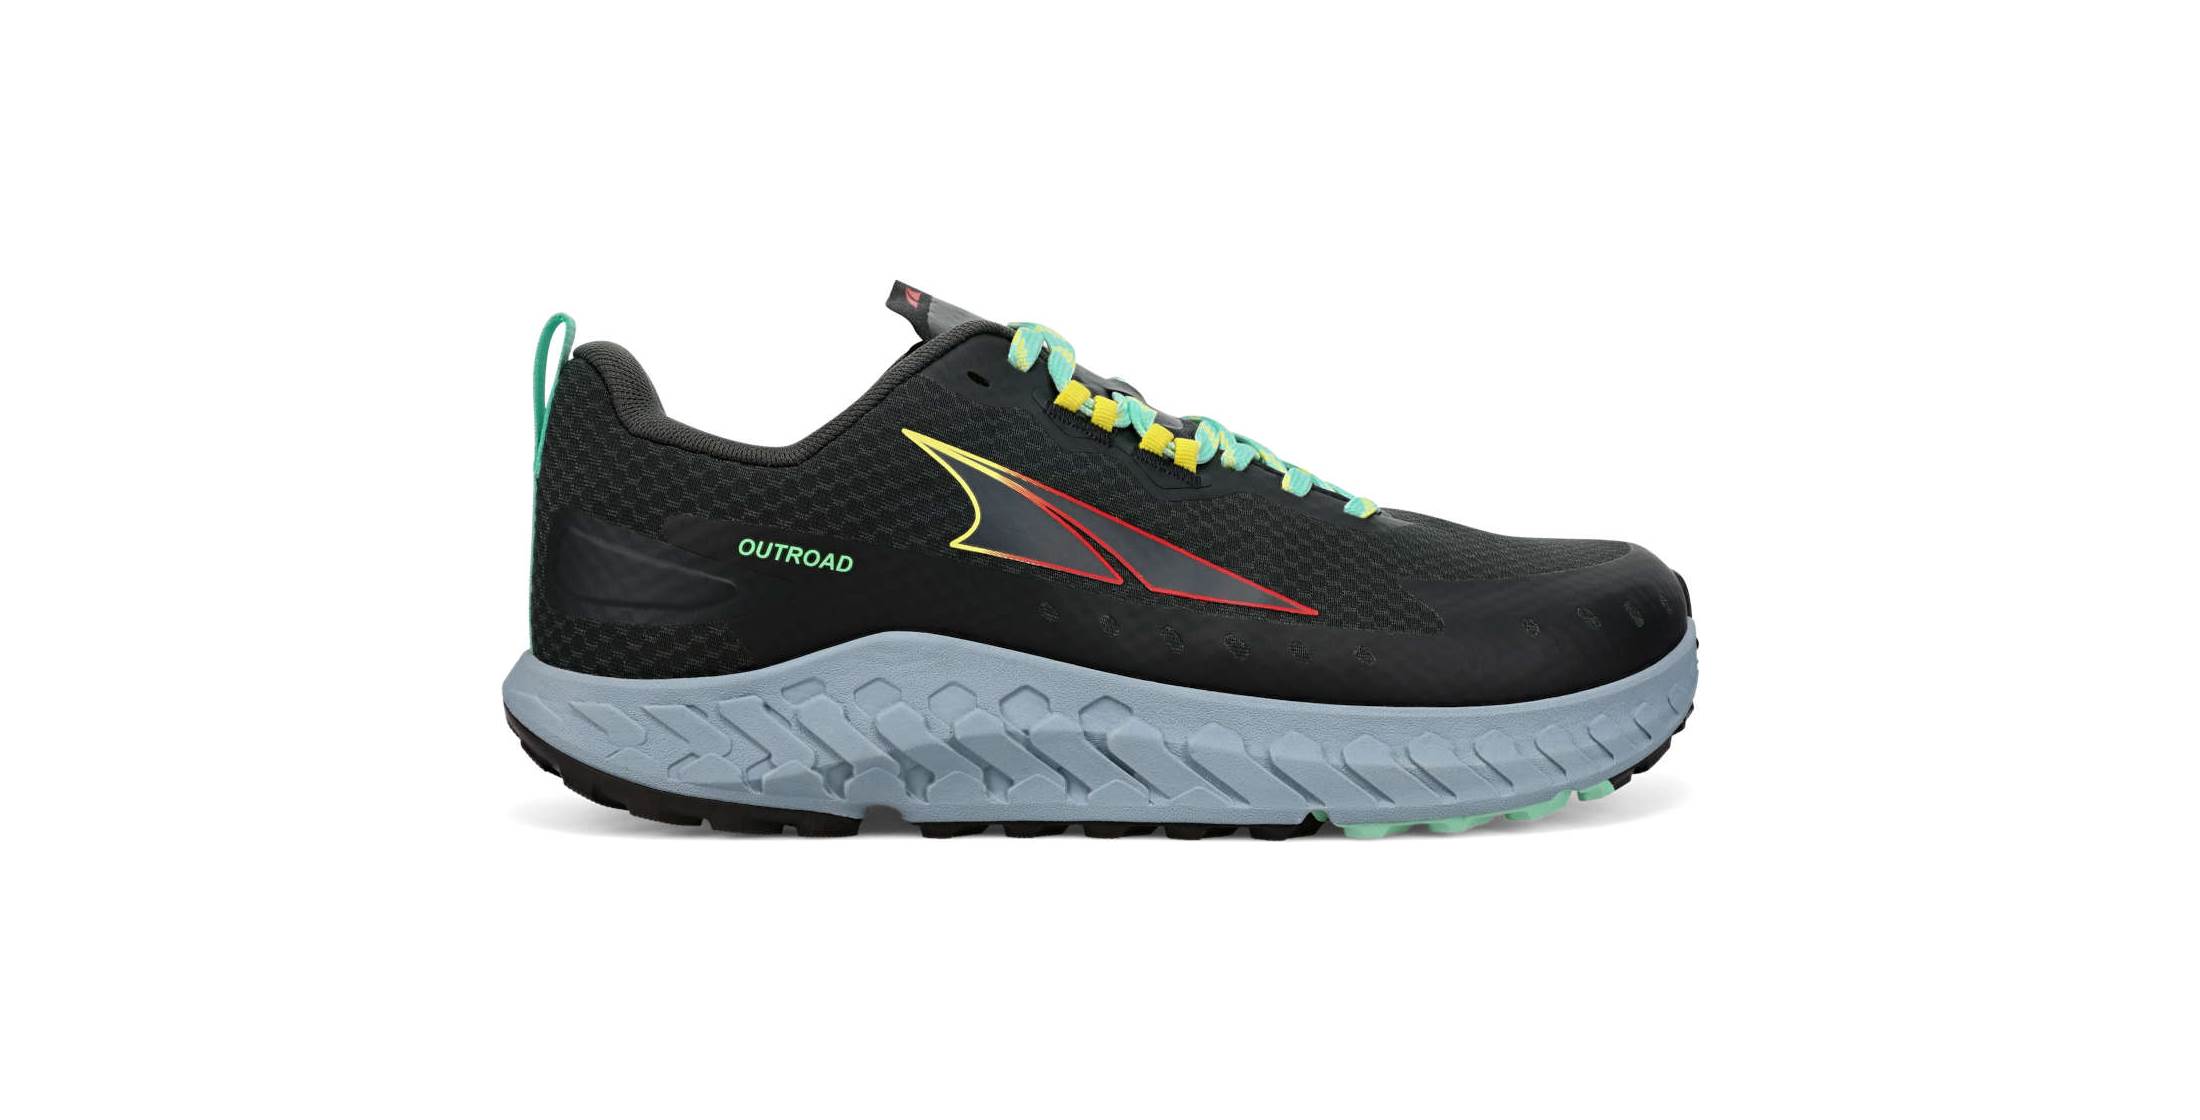 Altra Mens Outroad Trail Running Shoes OutdoorGB